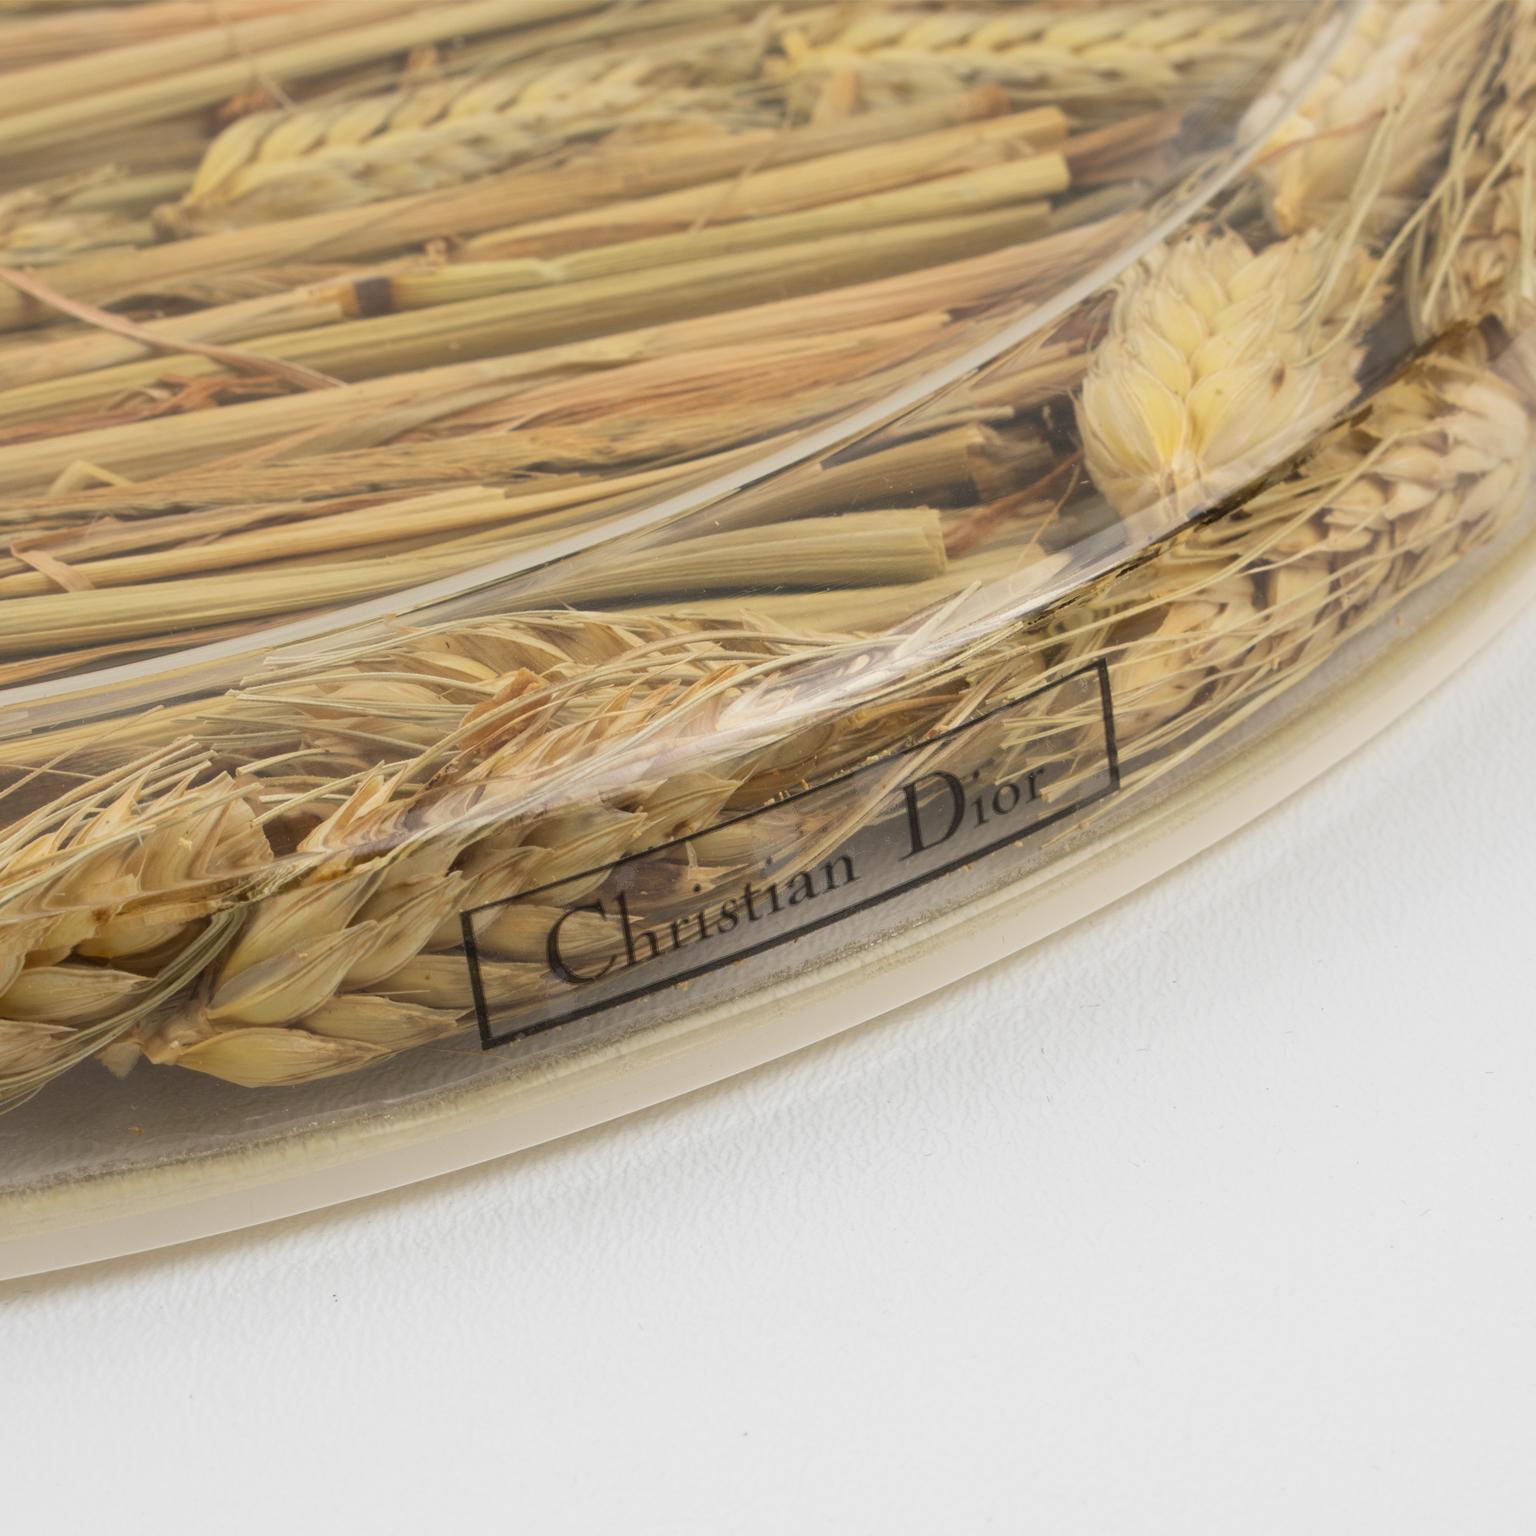 Late 20th Century Christian Dior Home Collection Tray Board Platter Lucite and Wheat, 1970s For Sale